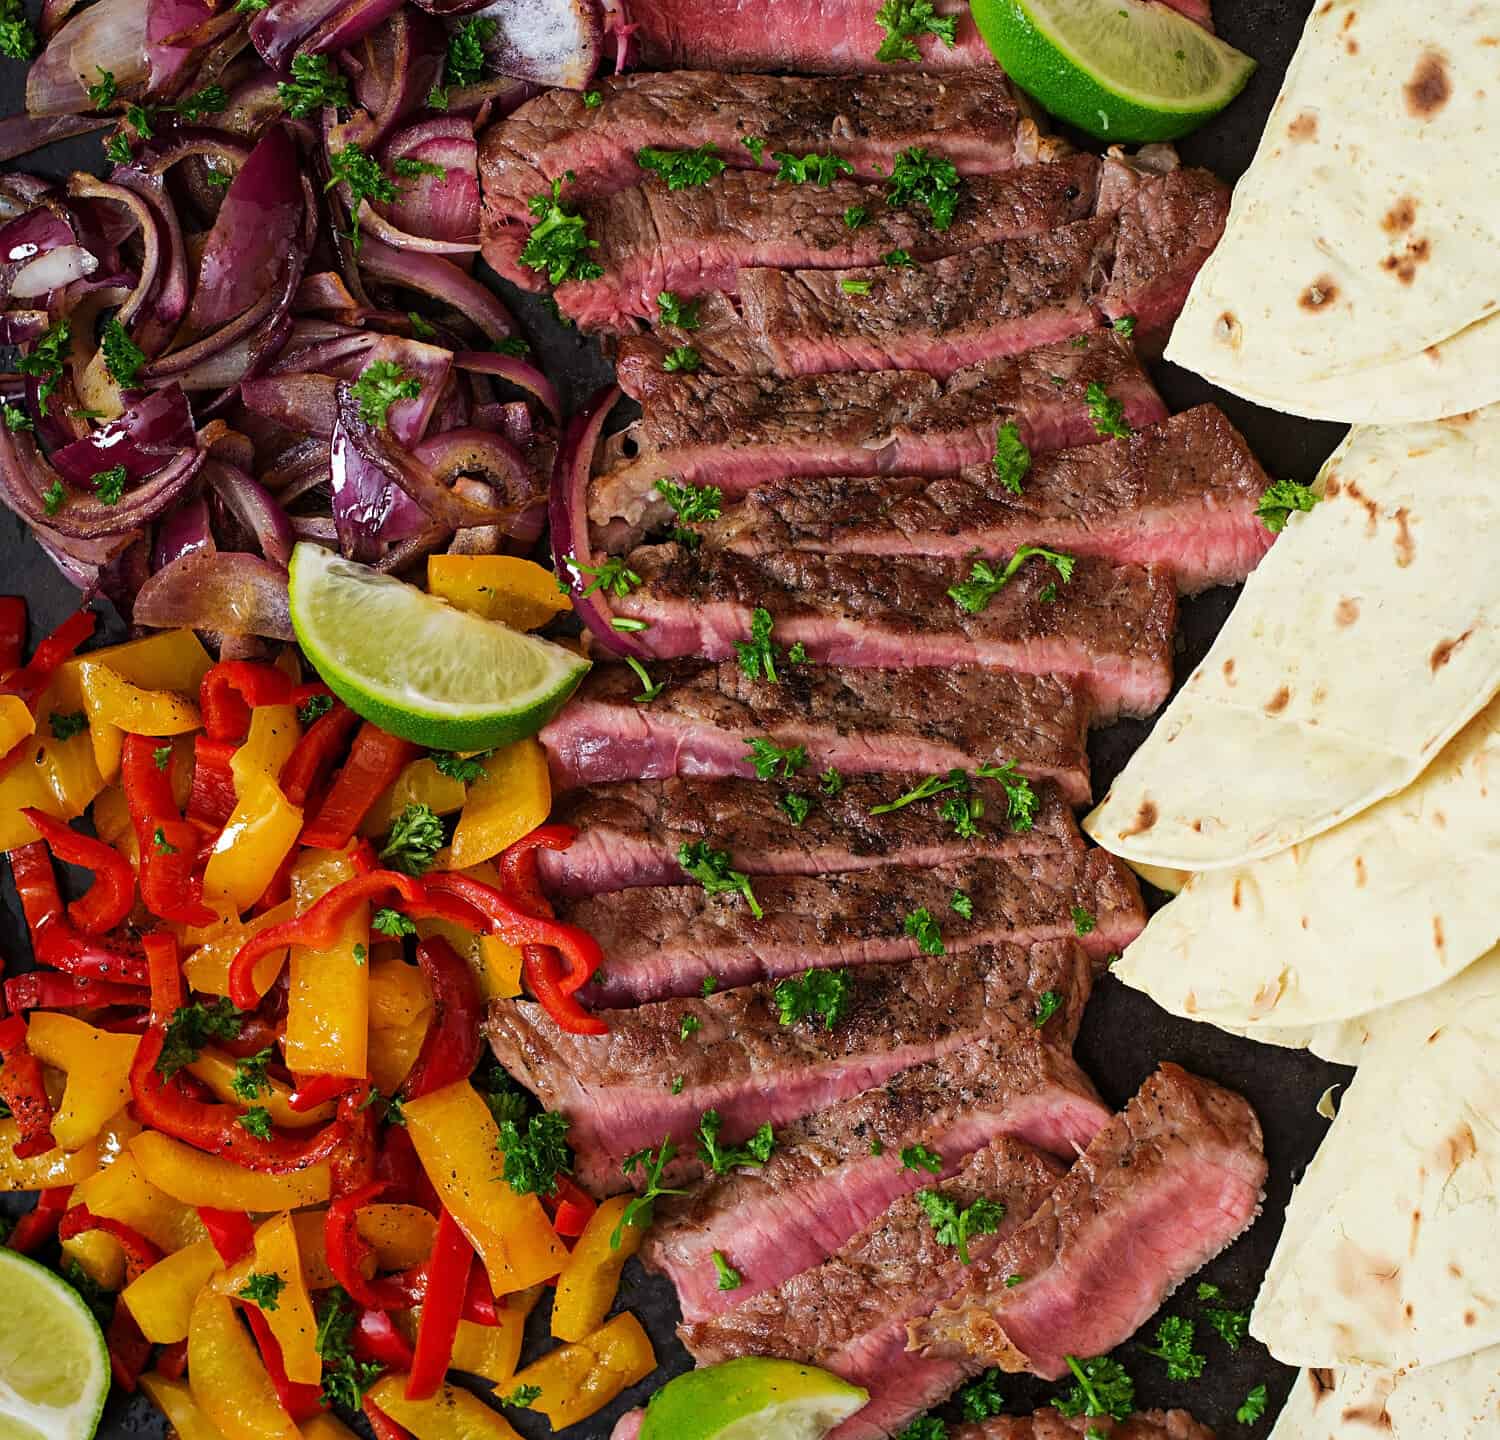 Mexican fajitas for beef steak and grilled vegetables. Top view